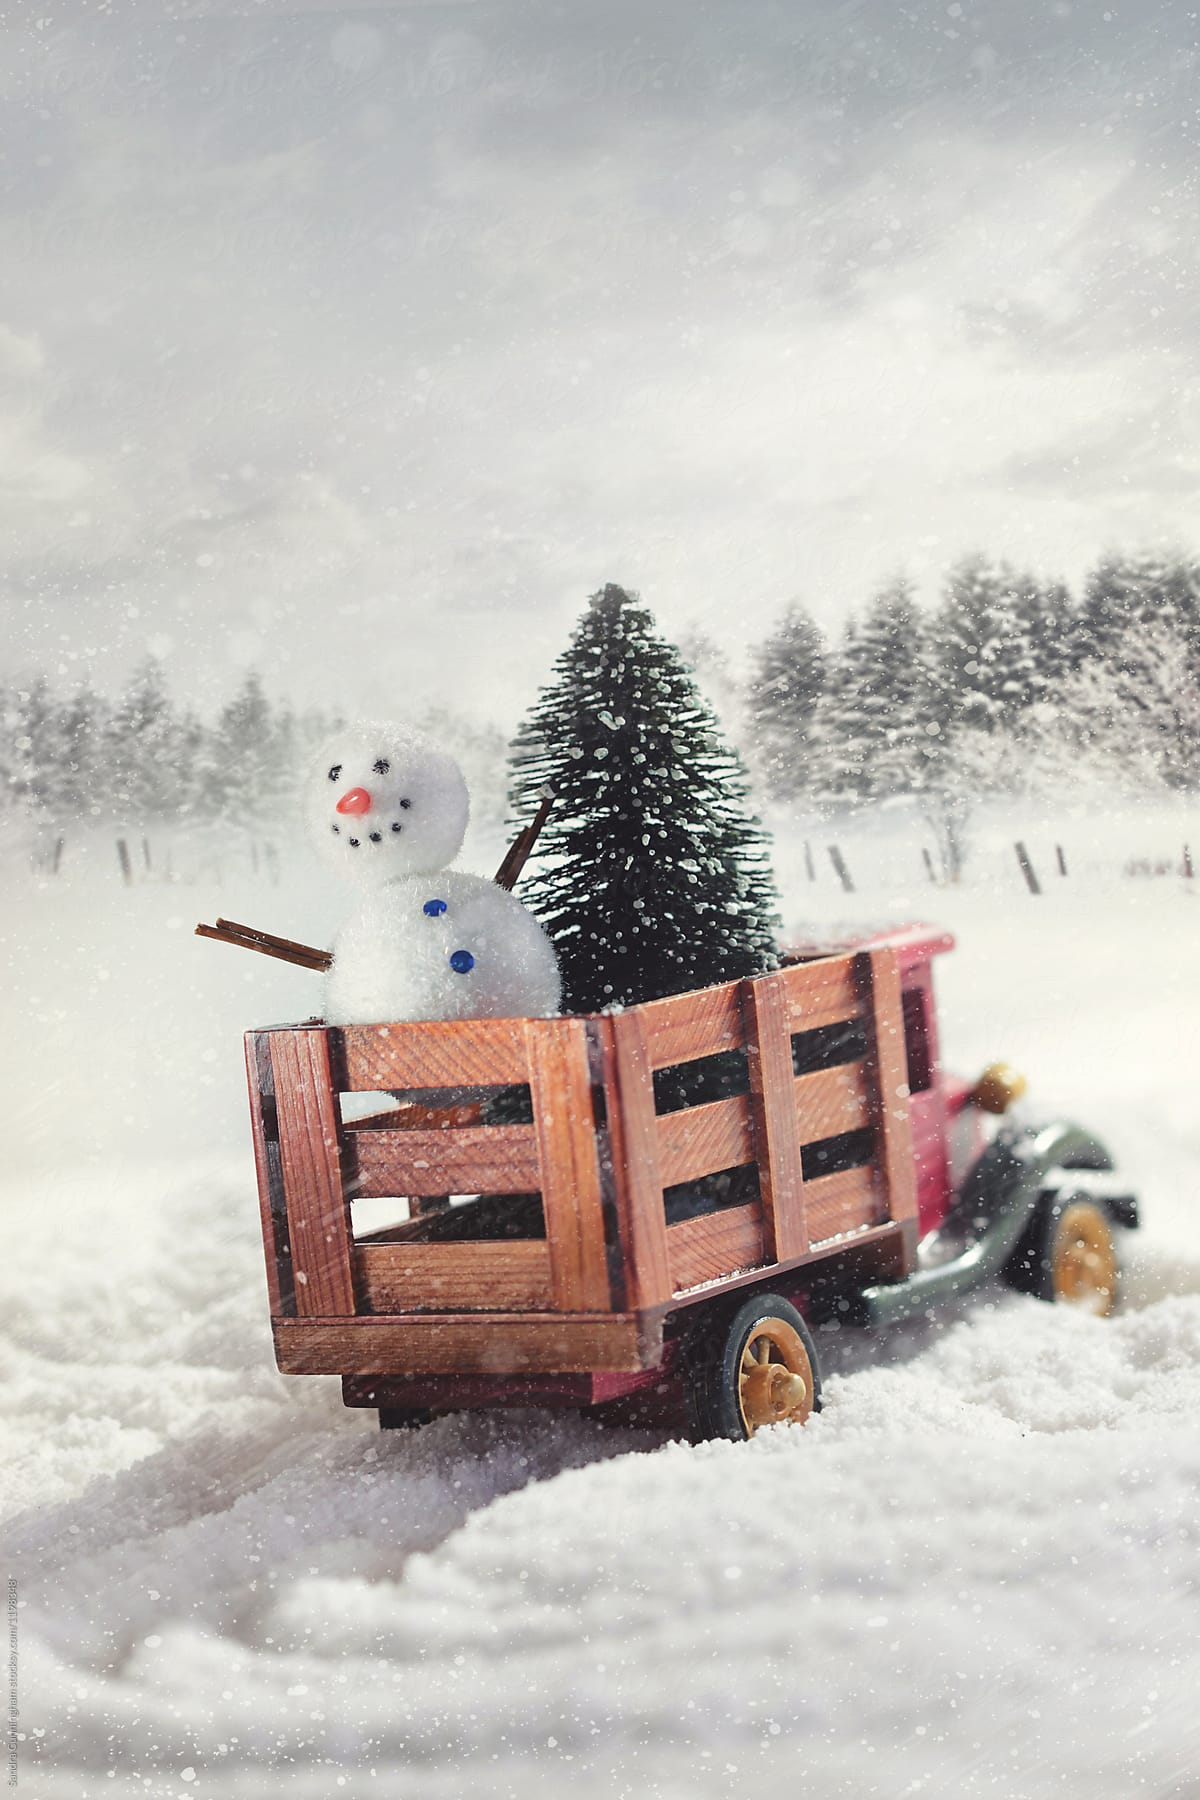 Small toy truck with trees and snowman in snow storm